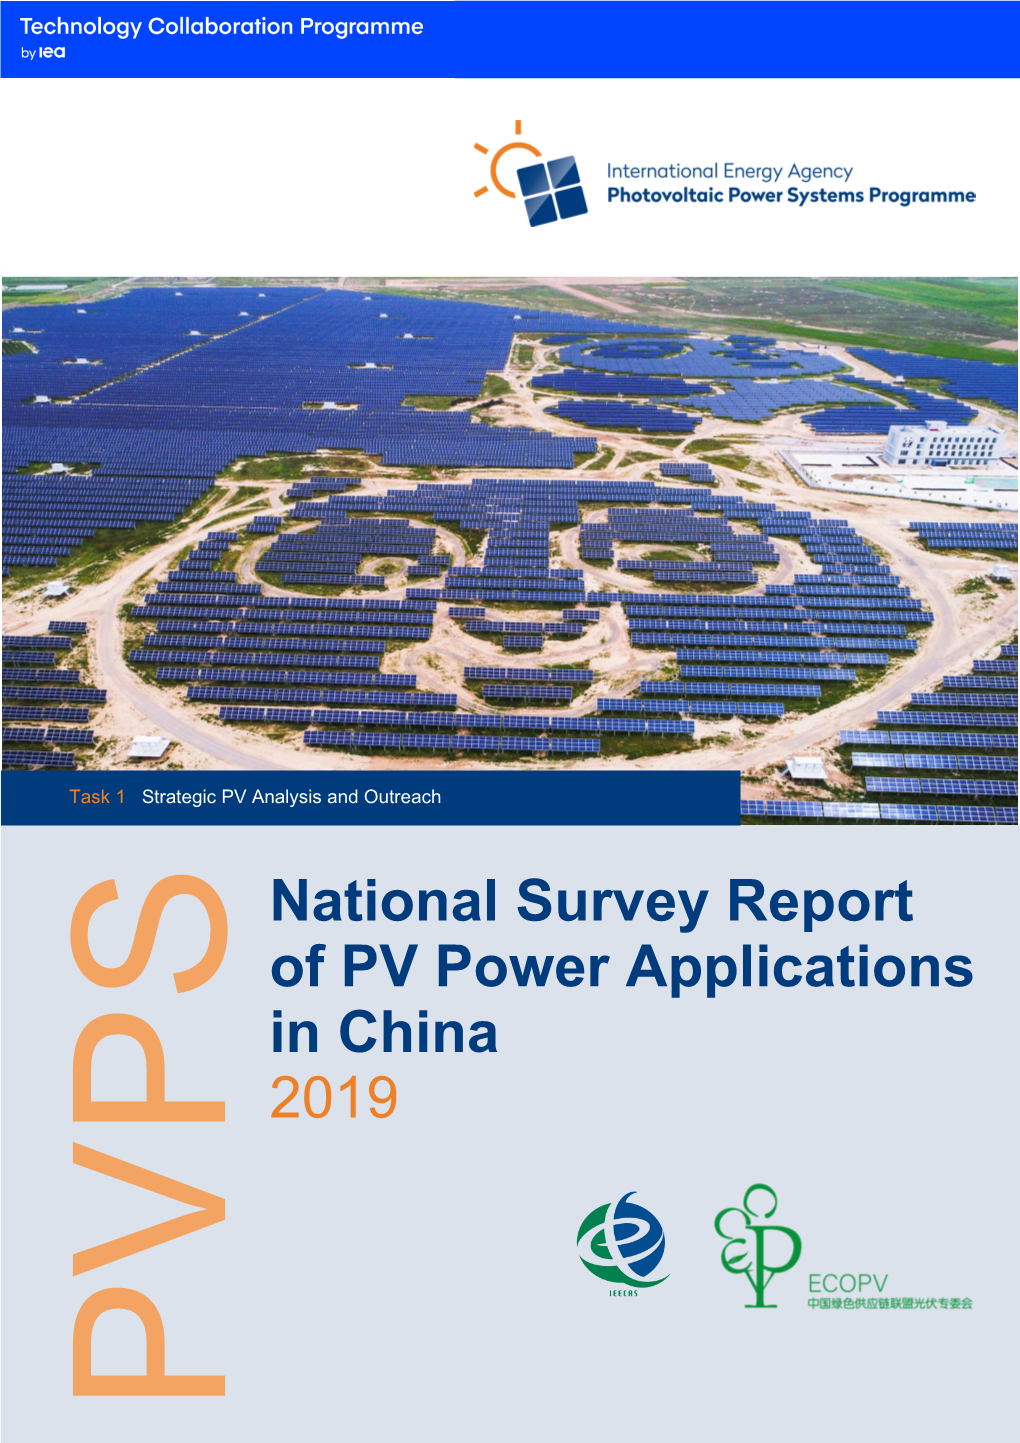 National Survey Report of PV Power Applications in China